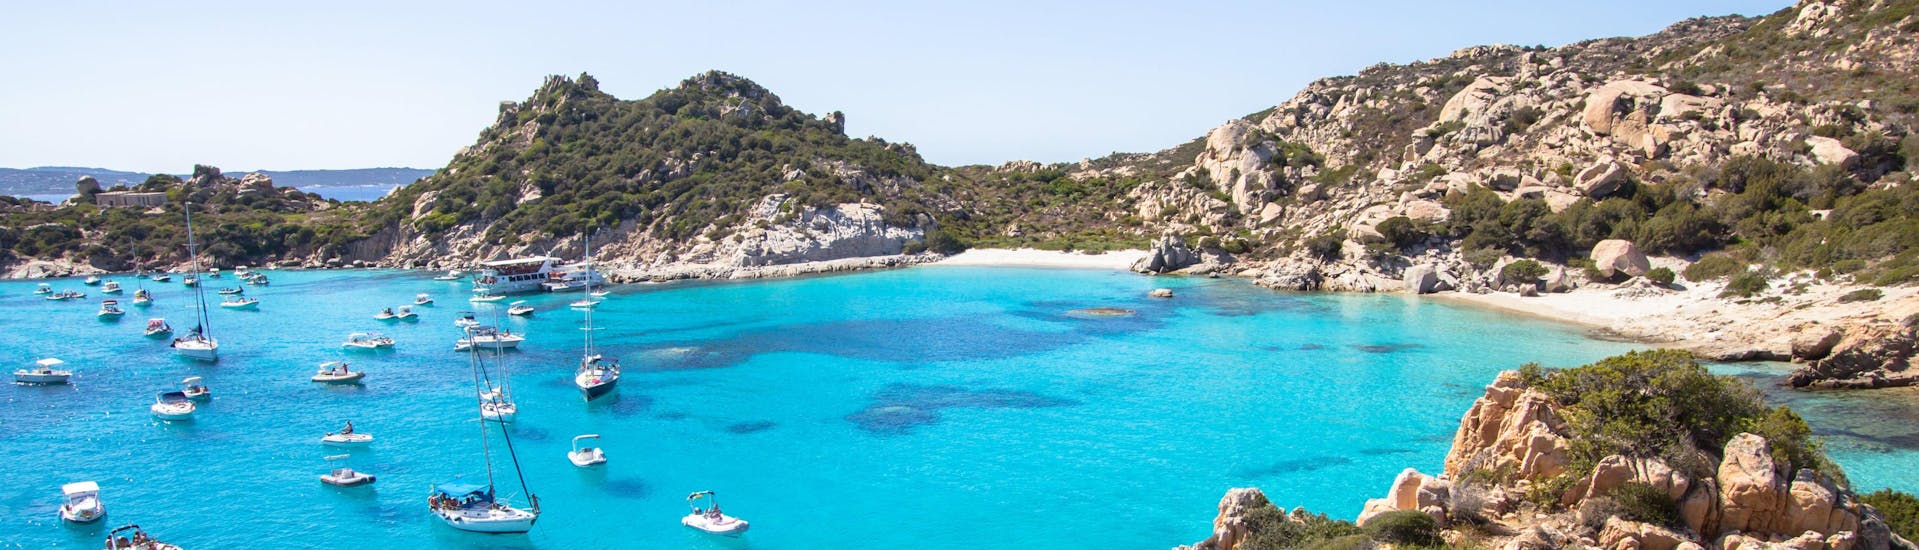 An image of the beautiful Cala Corsada, one of the places you get to visit on a boat tour in La Maddalena.